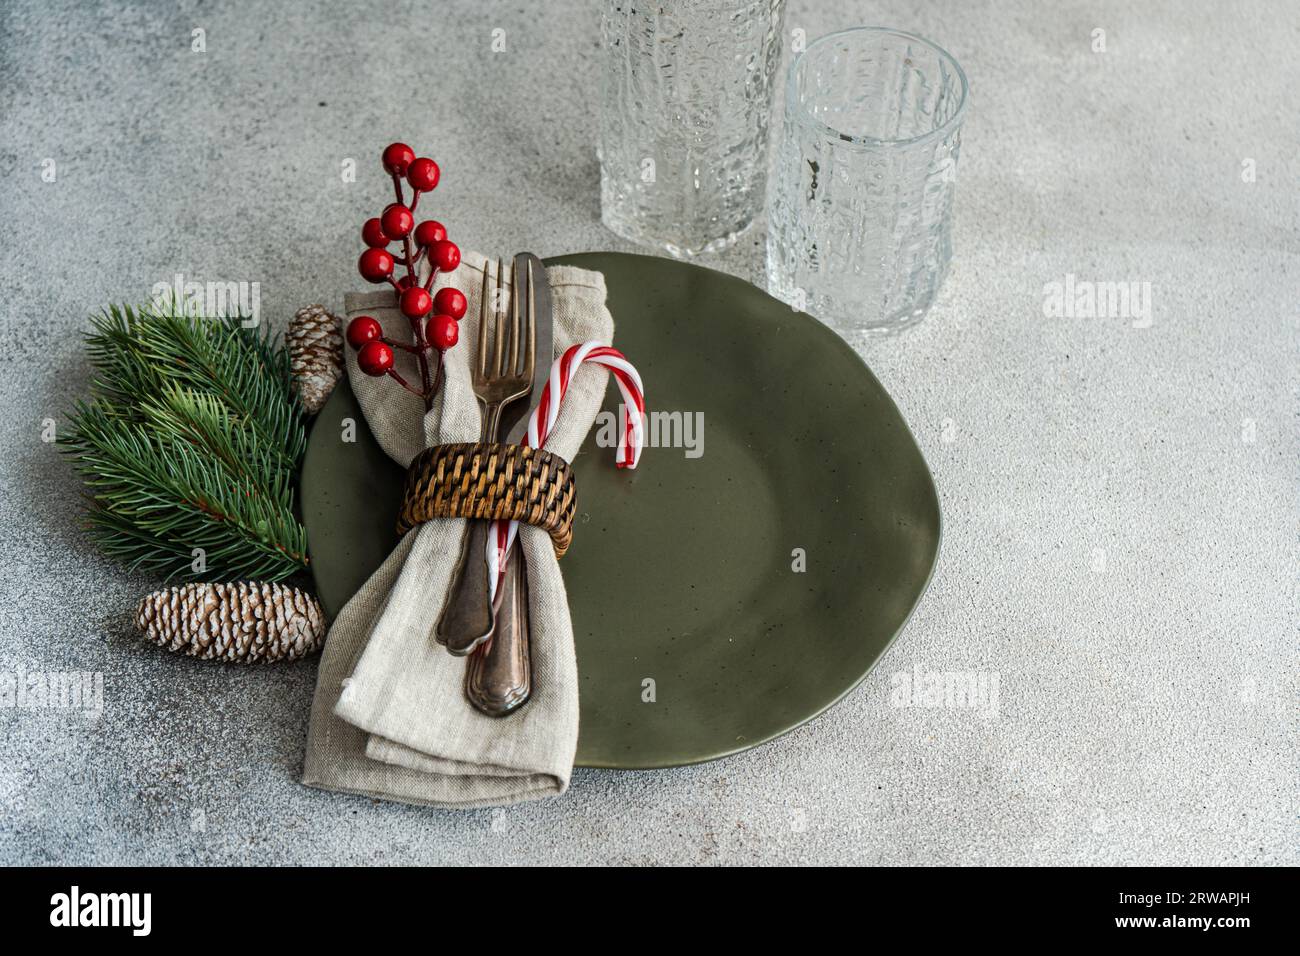 Overhead view of a festive Christmas place setting on a table Stock Photo